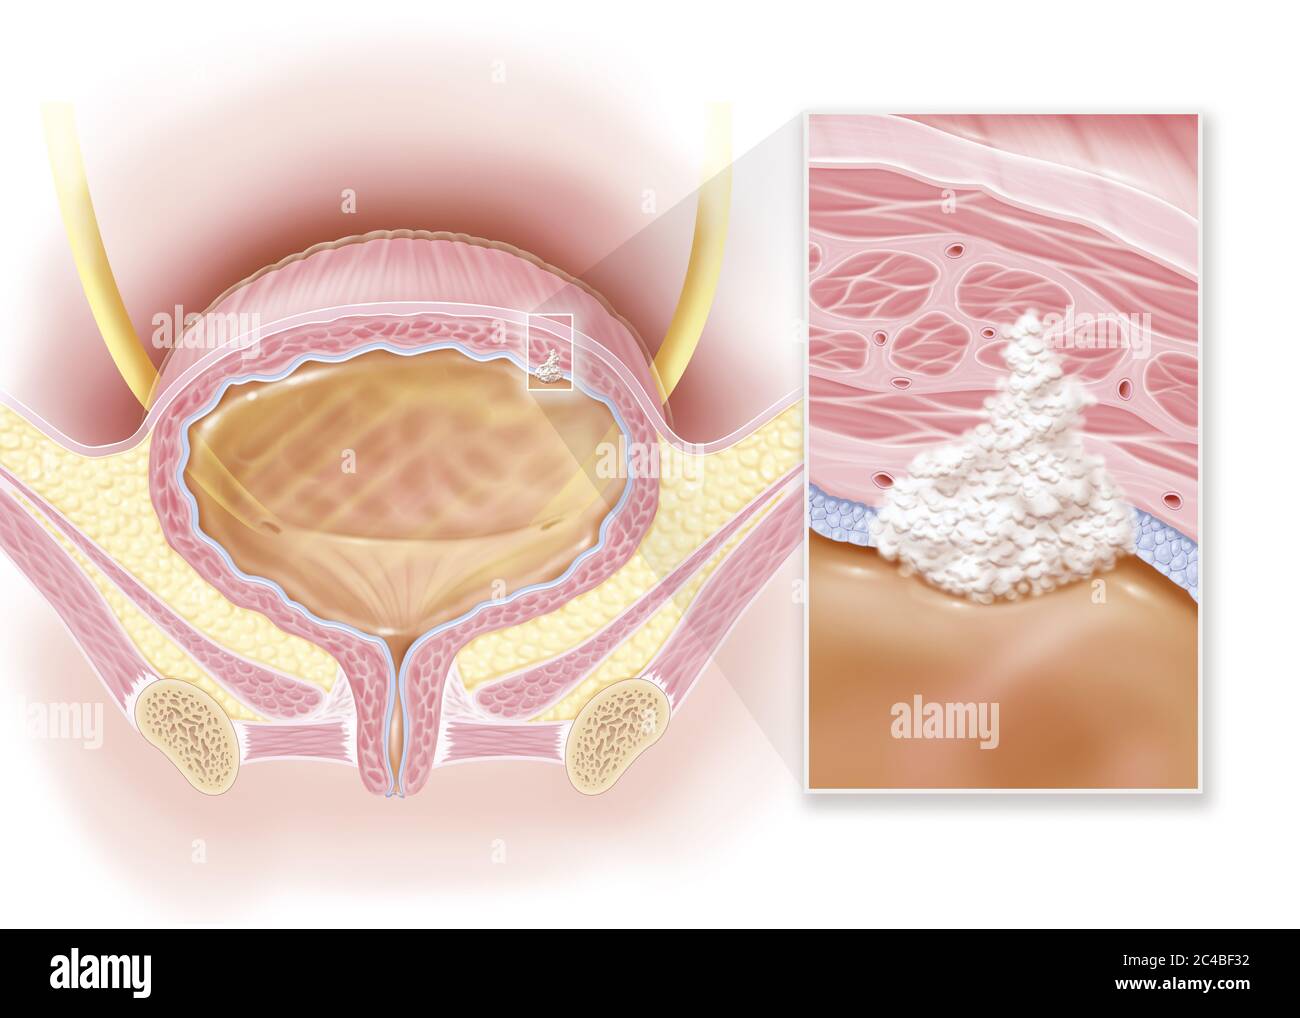 Invasive bladder cancer, stage II, muscle damage. This illustration shows a woman's bladder with a stage II invasive cancerous tumor at the top right Stock Photo